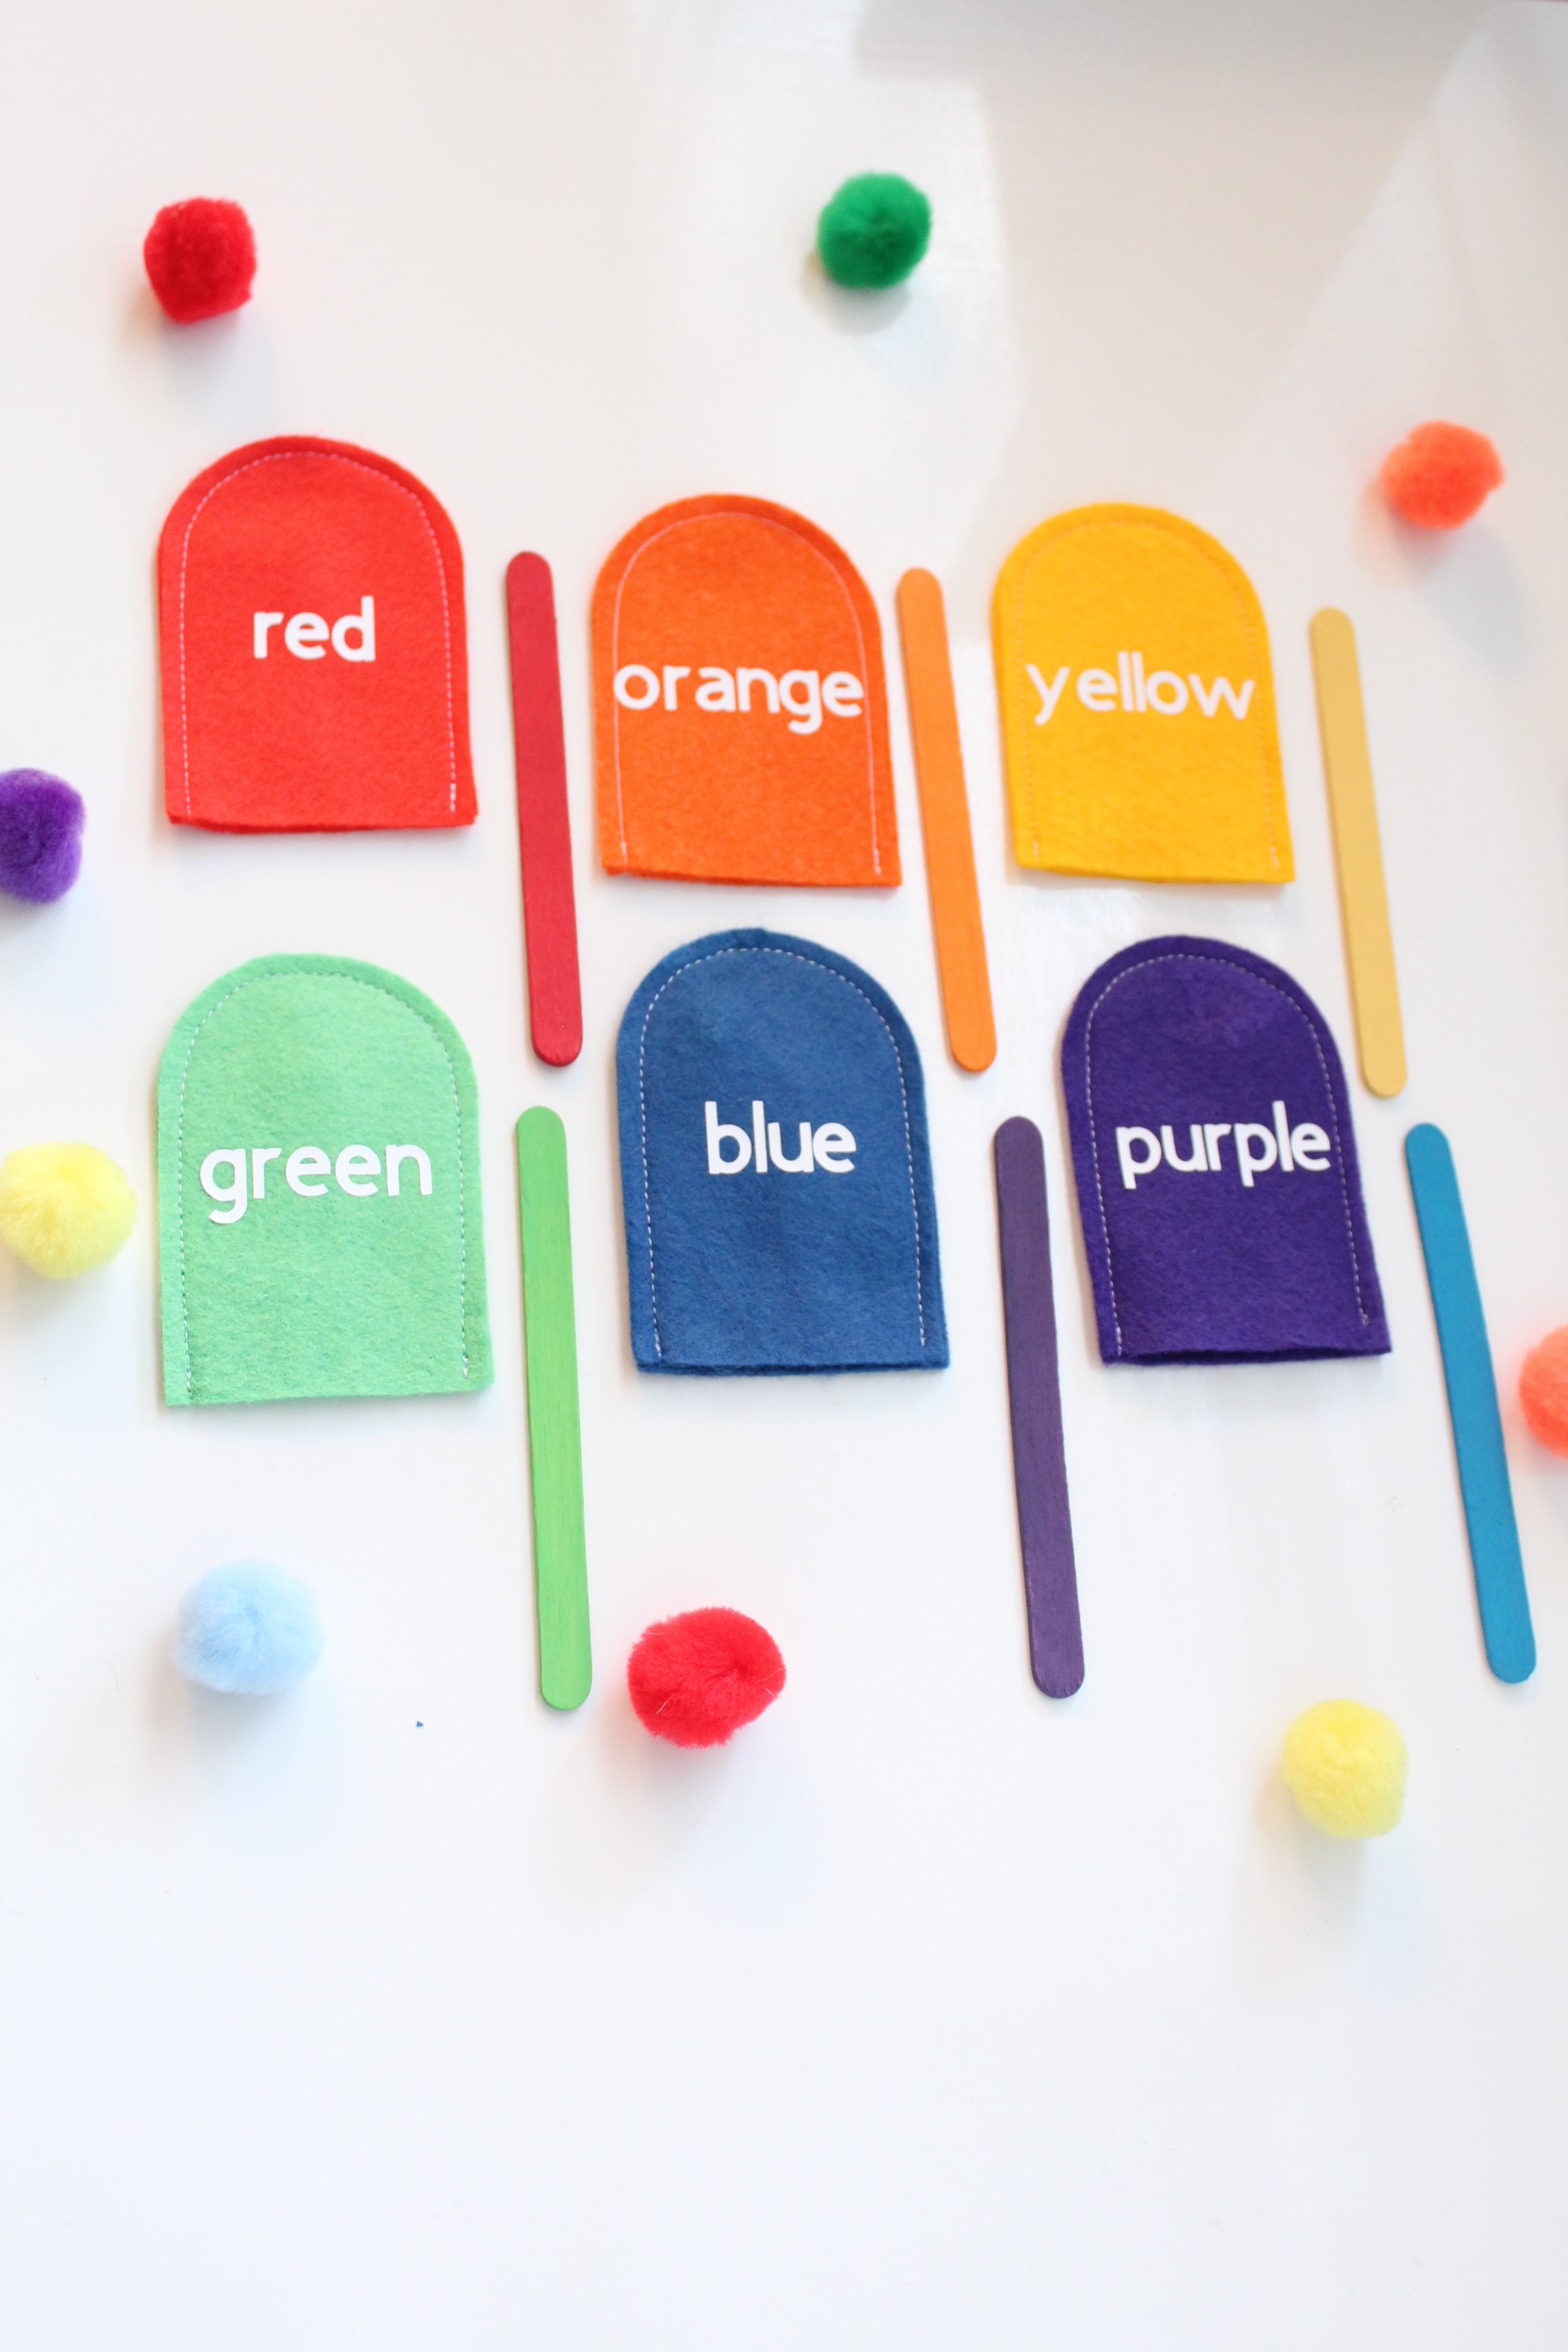 Your little one will have SO much fun learning their colors with this DIY felt popsicle color matching activity!